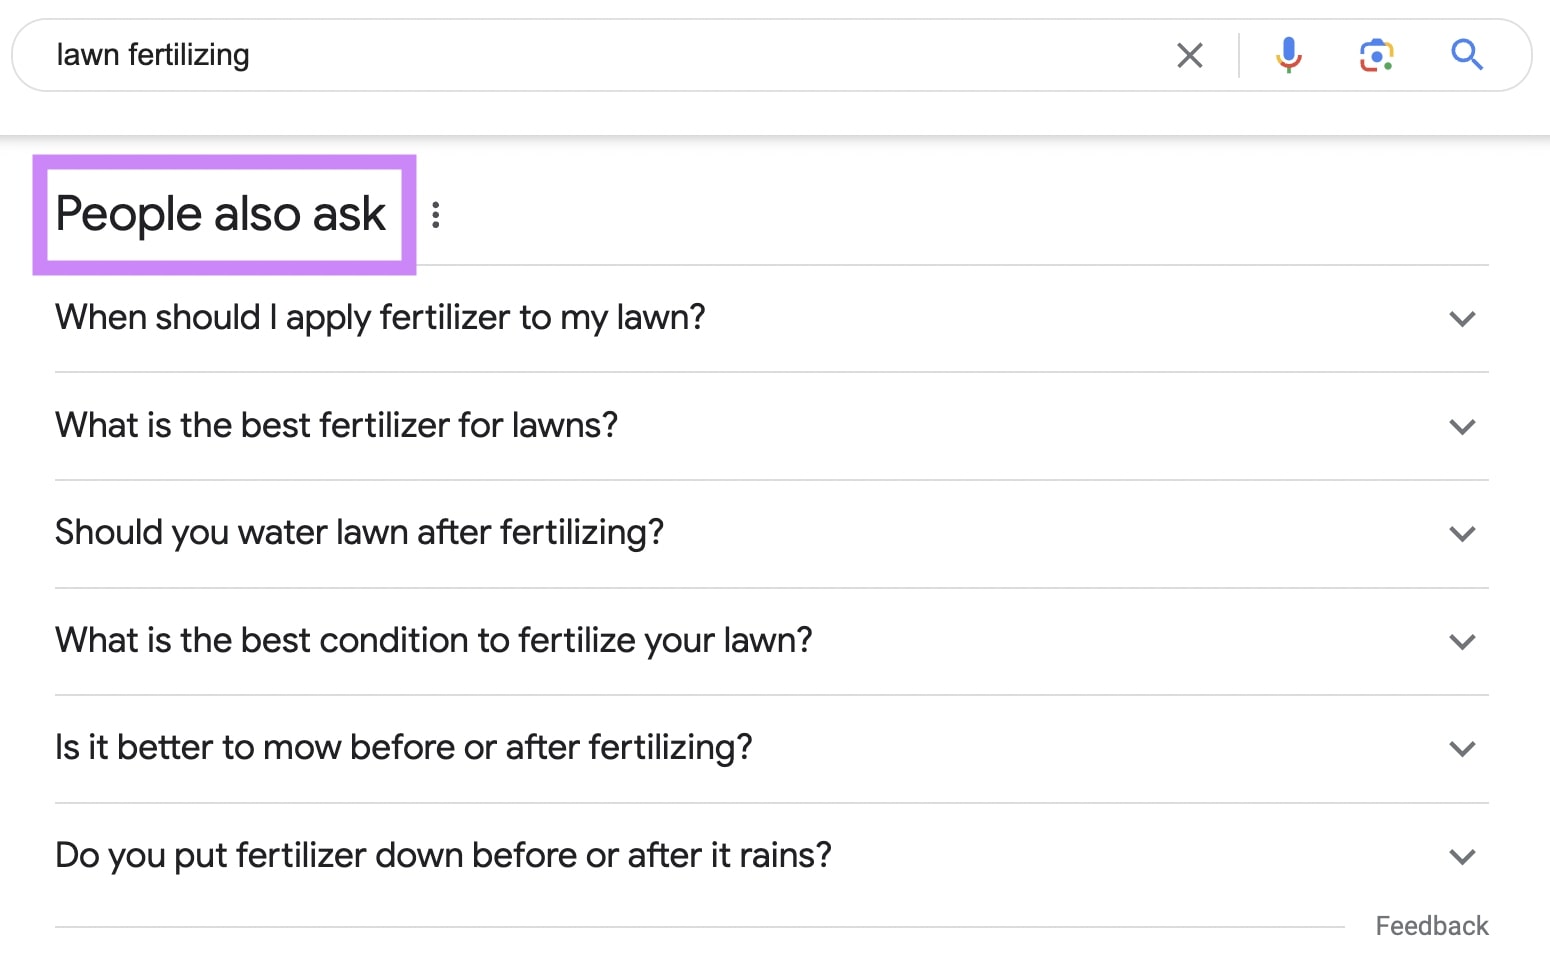 "People also ask" section on Google for "lawn ferrtilizing" query